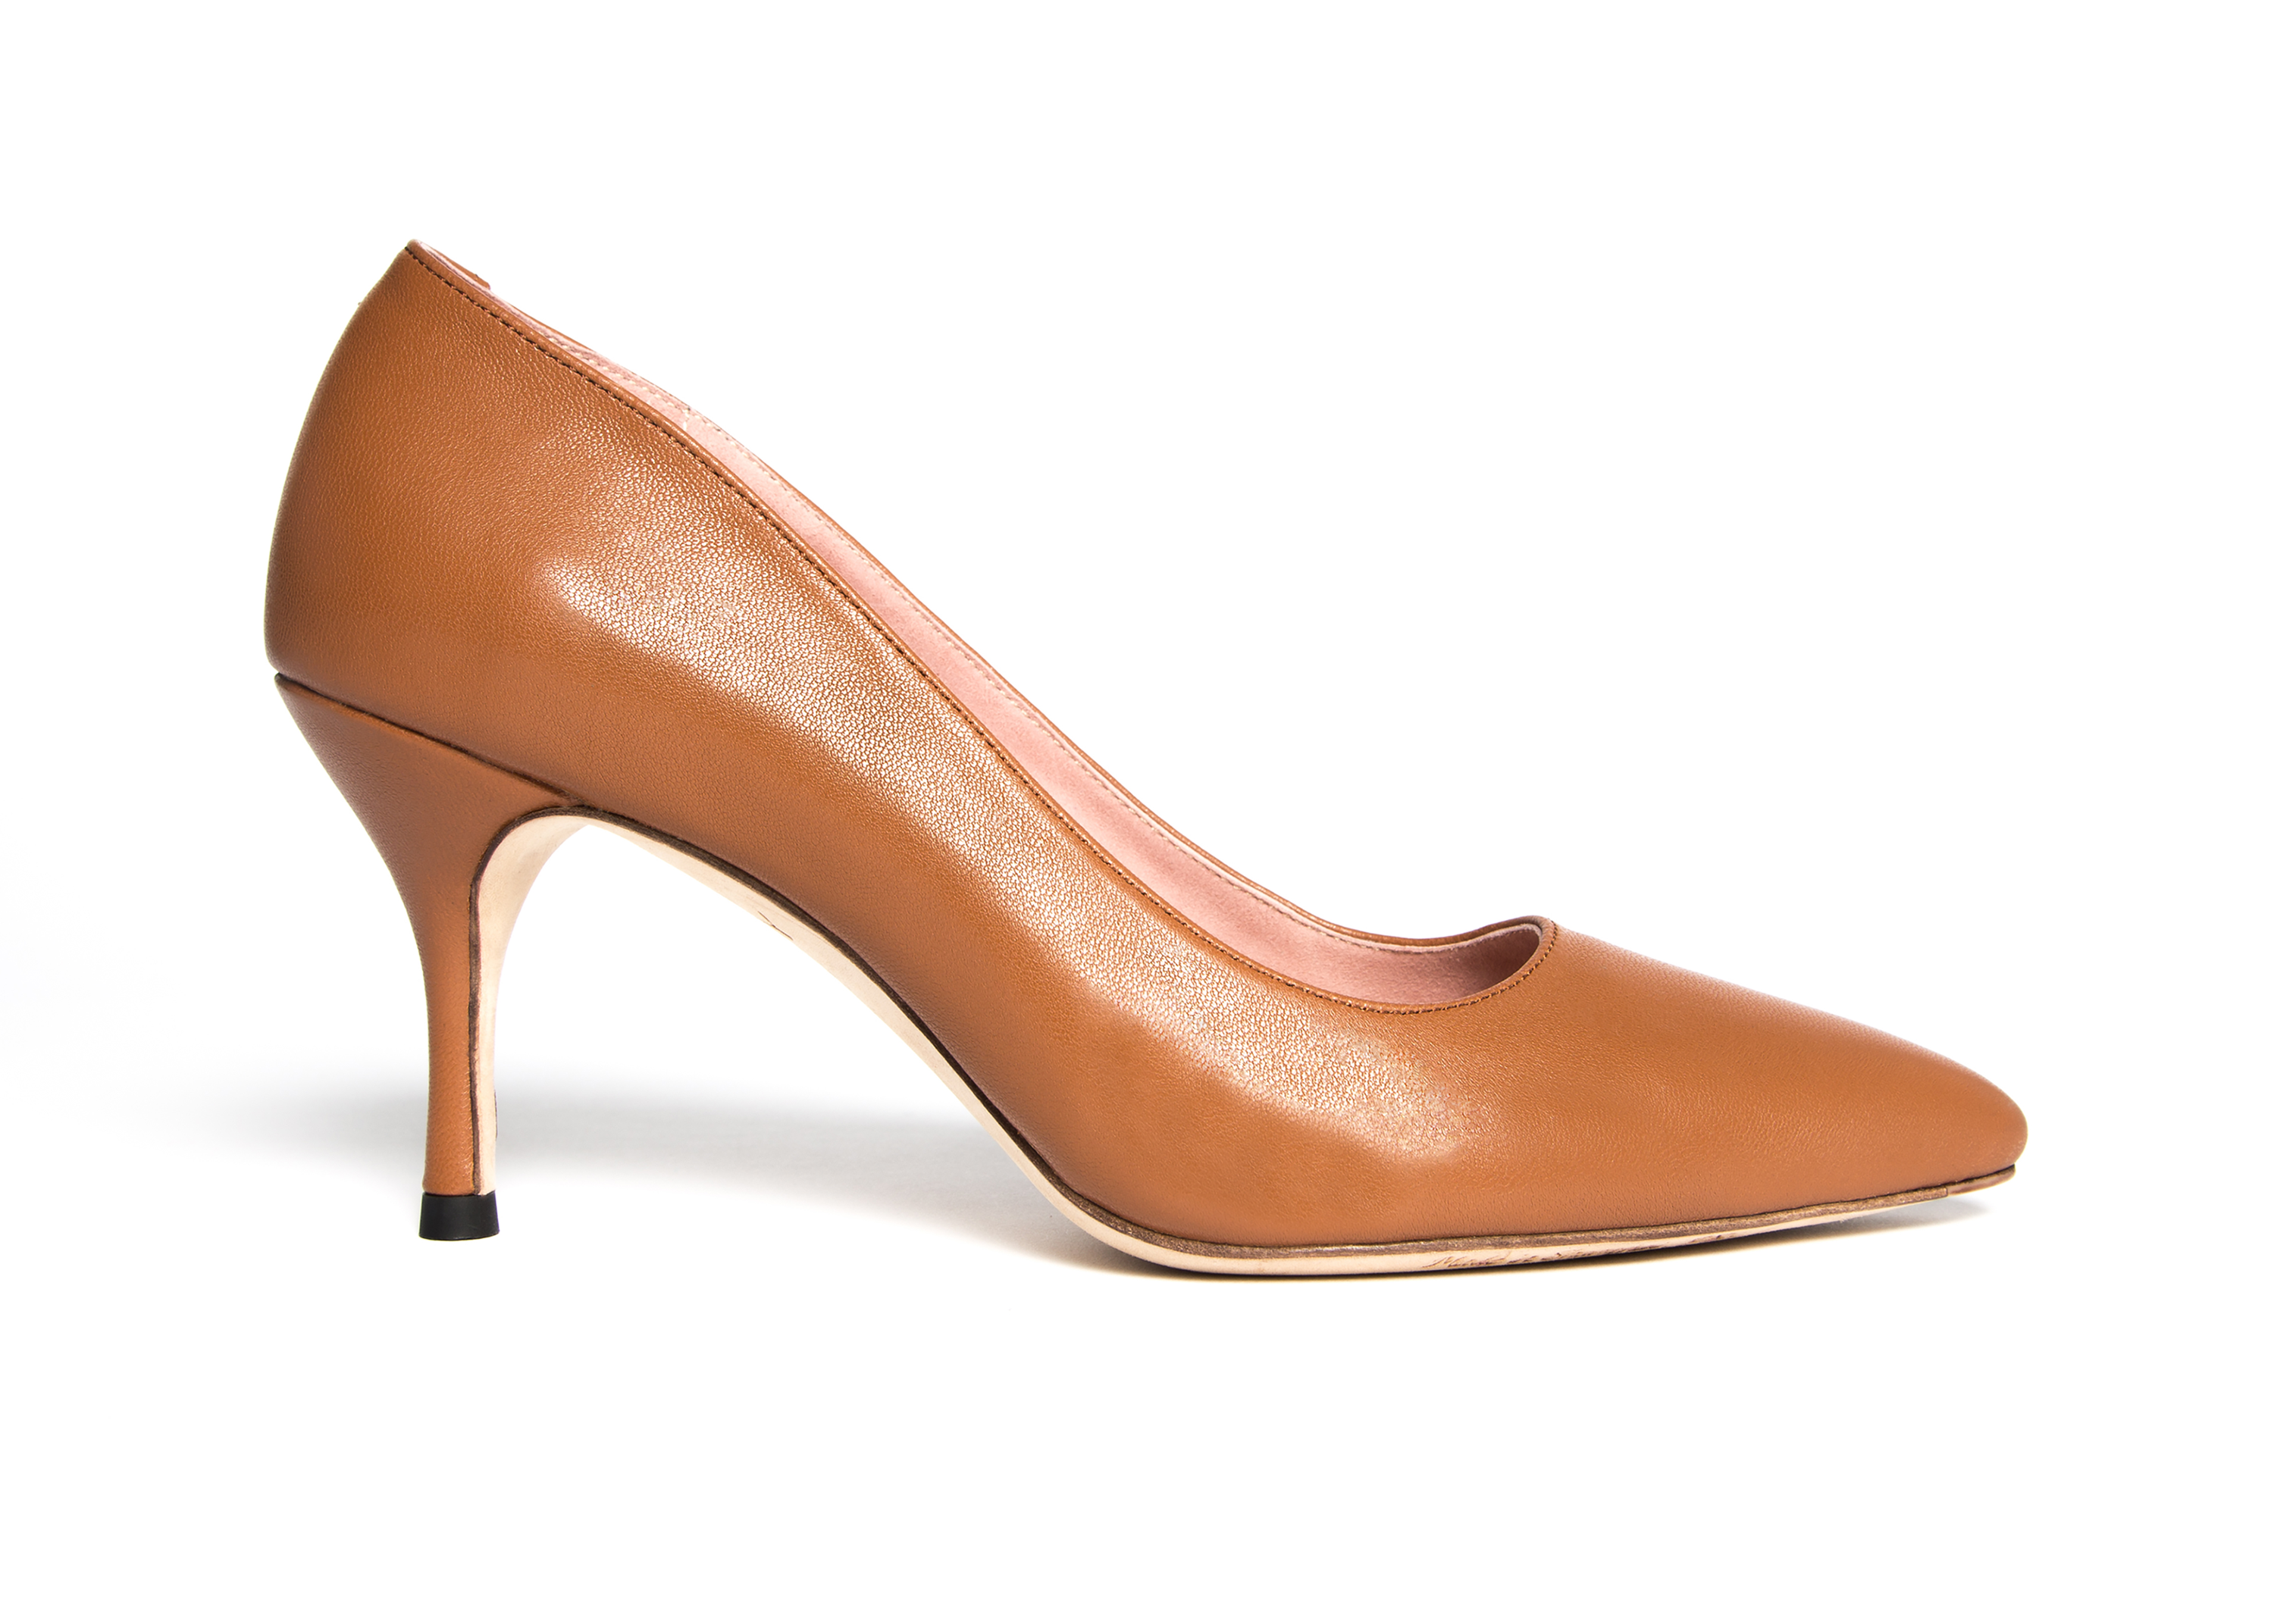 Caramel Leather Pump - Comfortable Heels - Ally Shoes